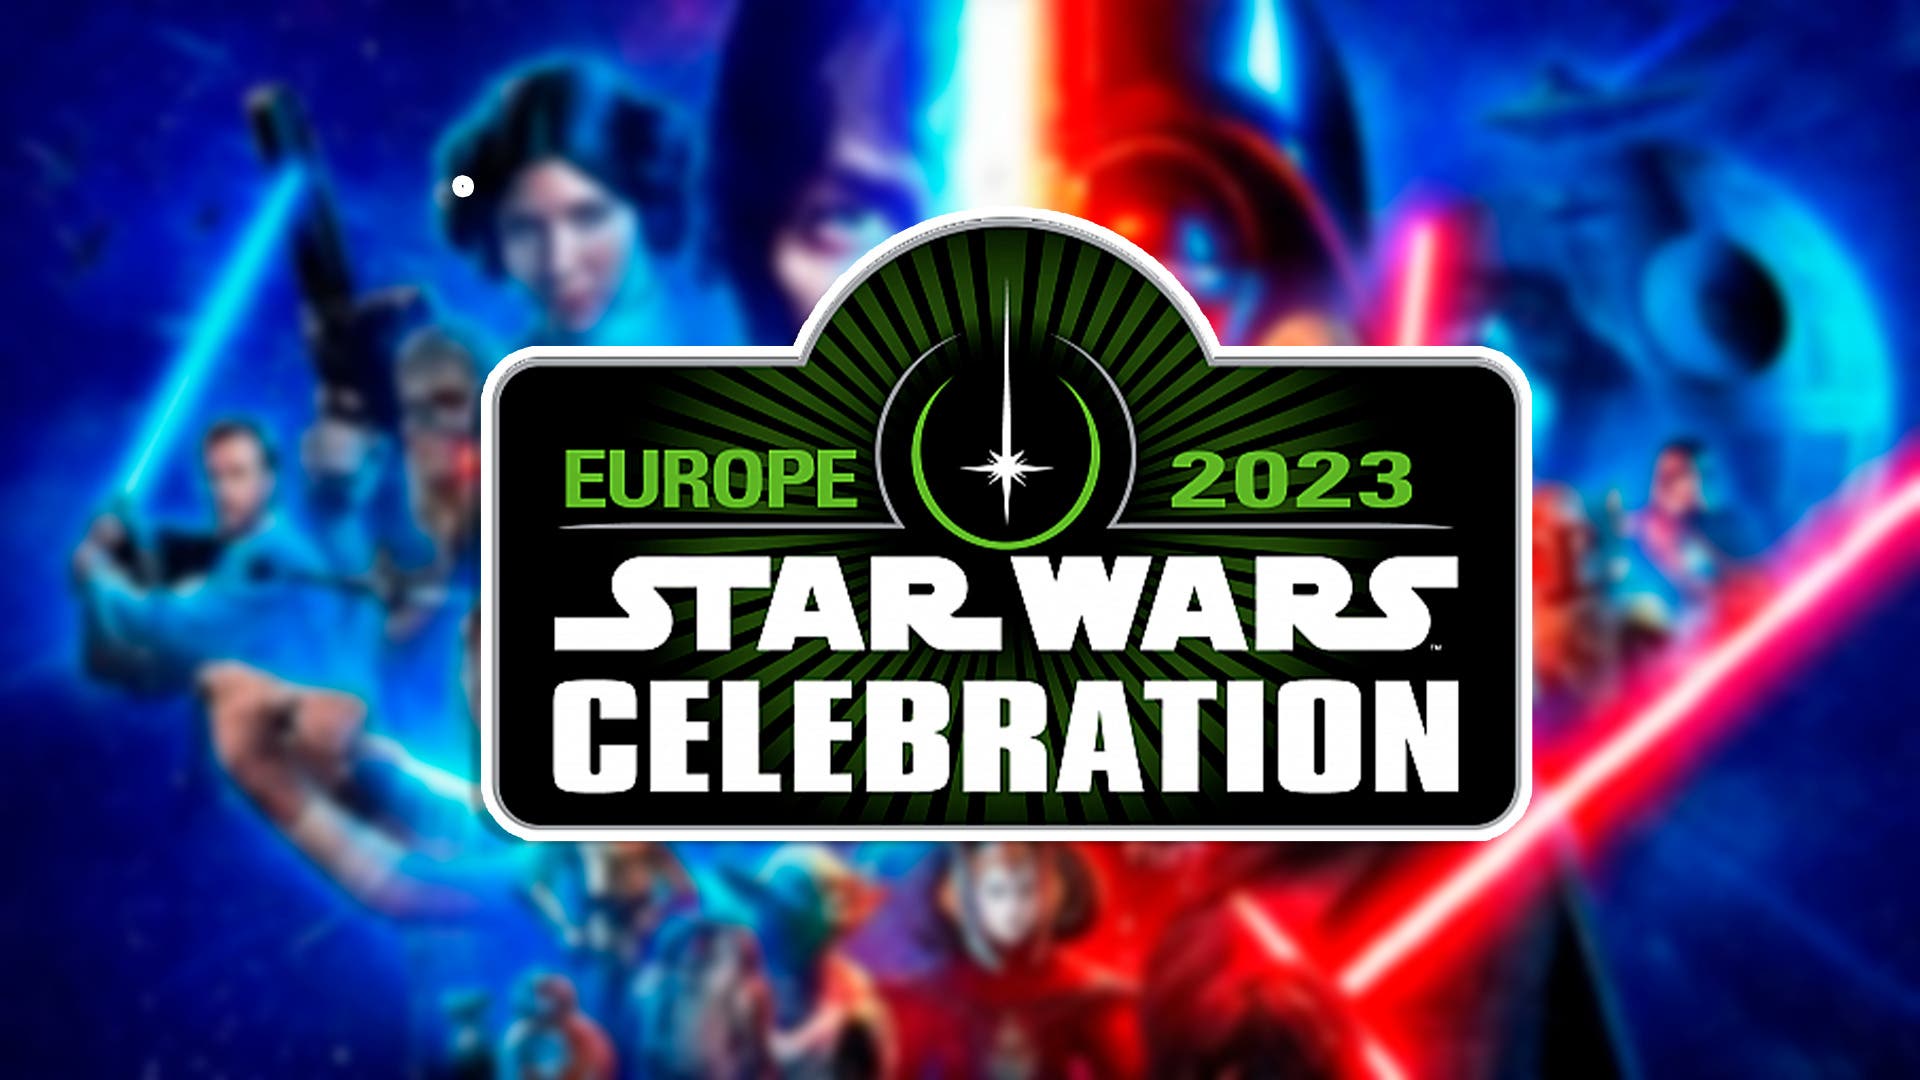 Star Wars Celebration 2023 recap: The Acolyte, Andor, The Mandalorian and more